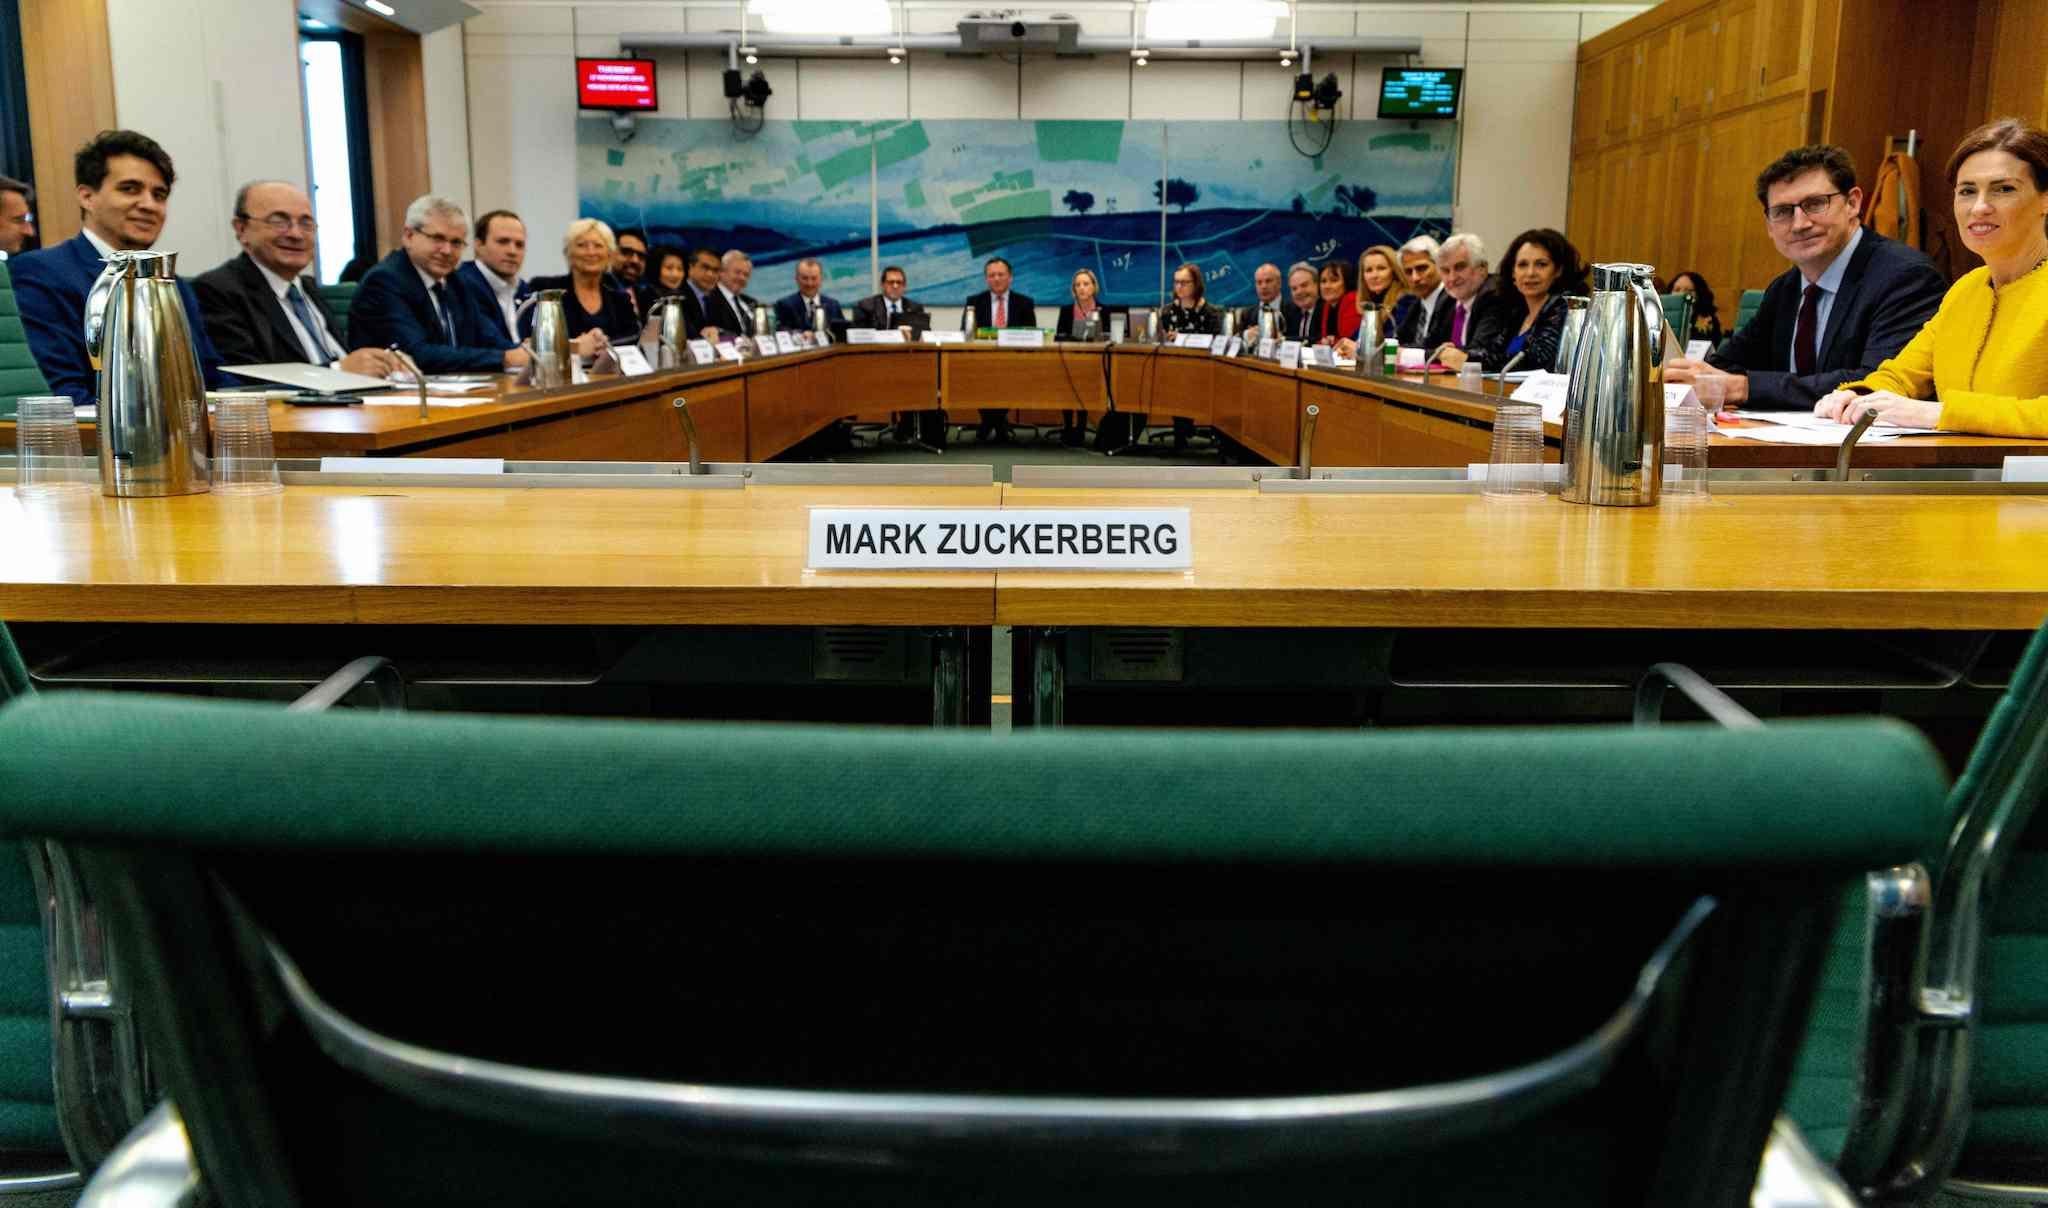 Facebook founder Mark Zuckerberg failed to attend a Commons committee hearing into the CA scandal